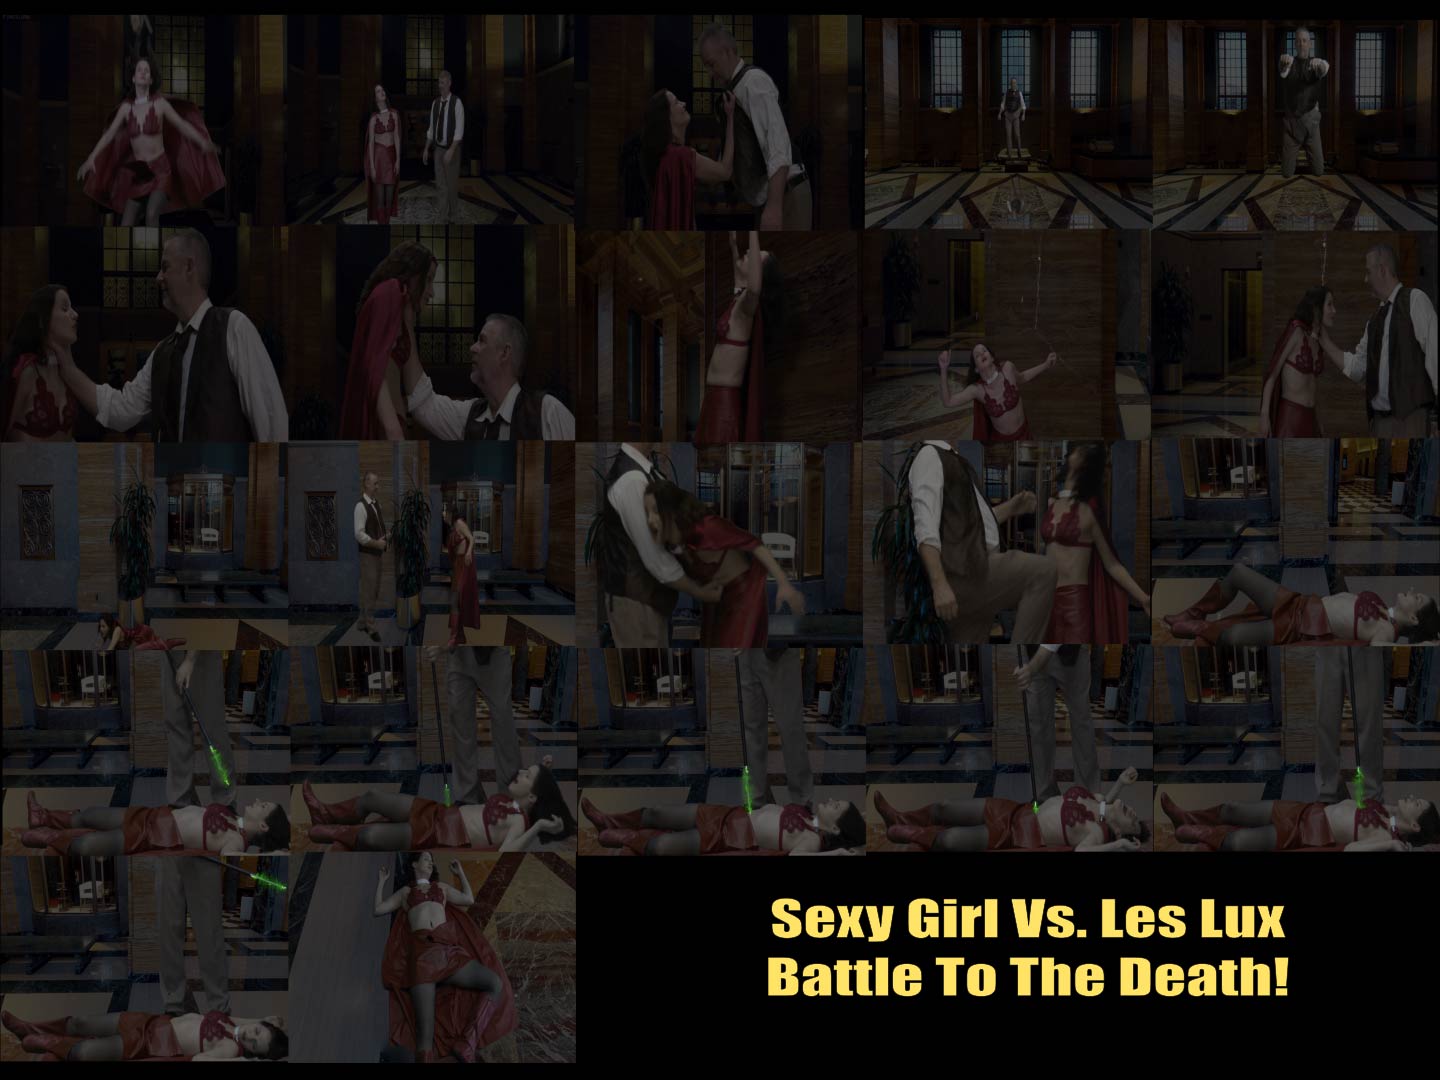 sexy_girl_vs-les_lux_death_battle_preview.jpg